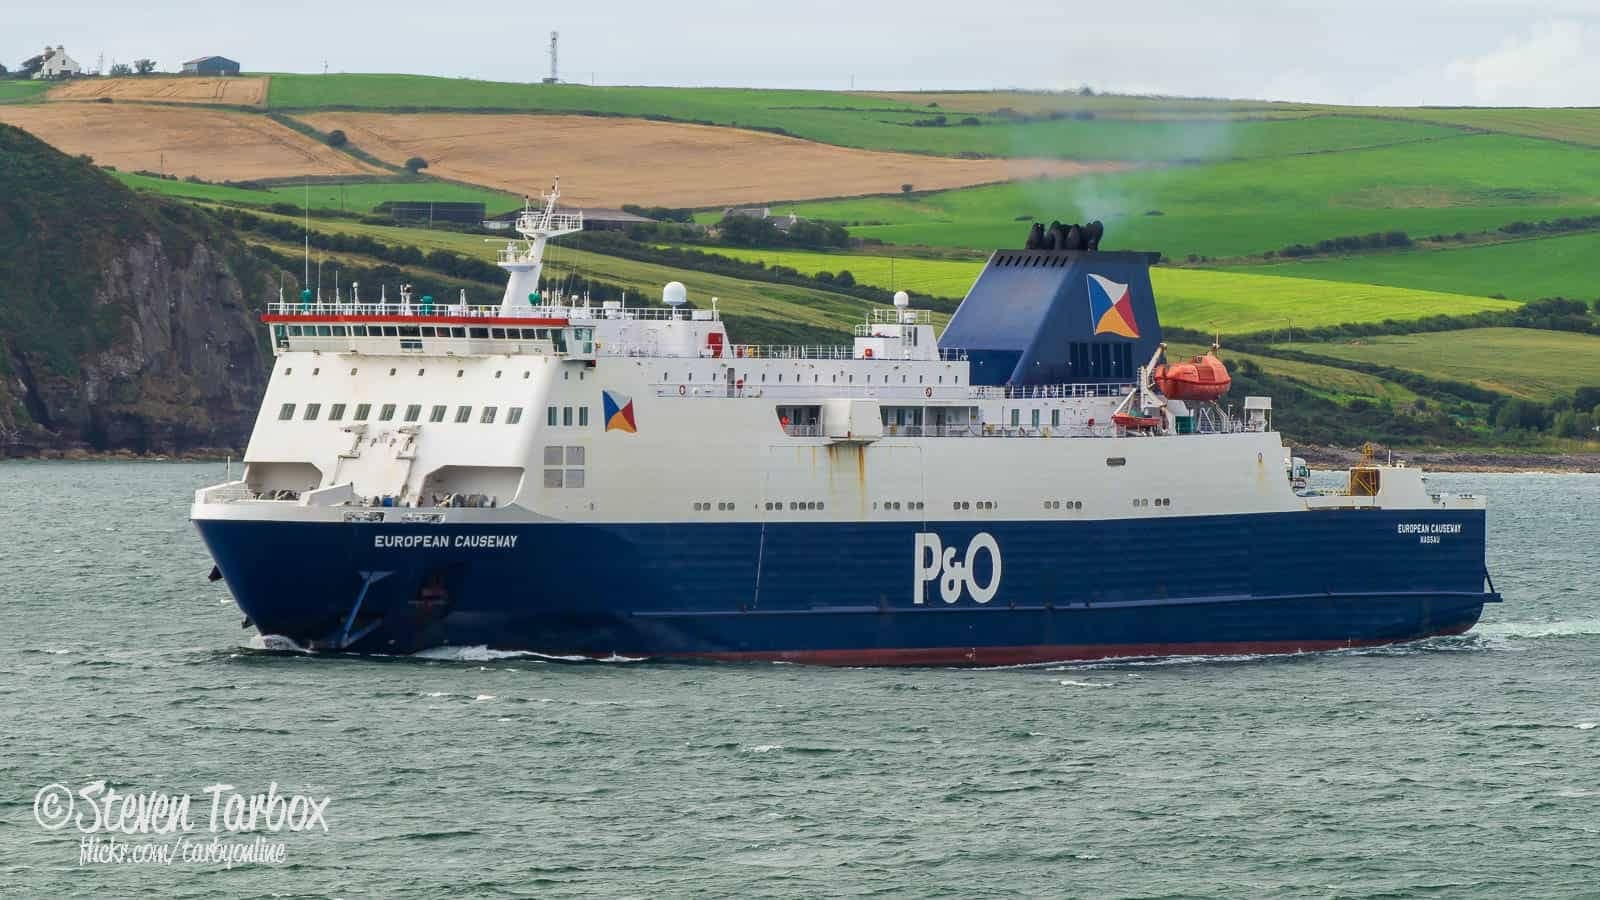 EUROPEAN CAUSEWAY approaches Cairnryan during August 2018 at the end of another sailing from Larne. Copyright © Steven Tarbox.